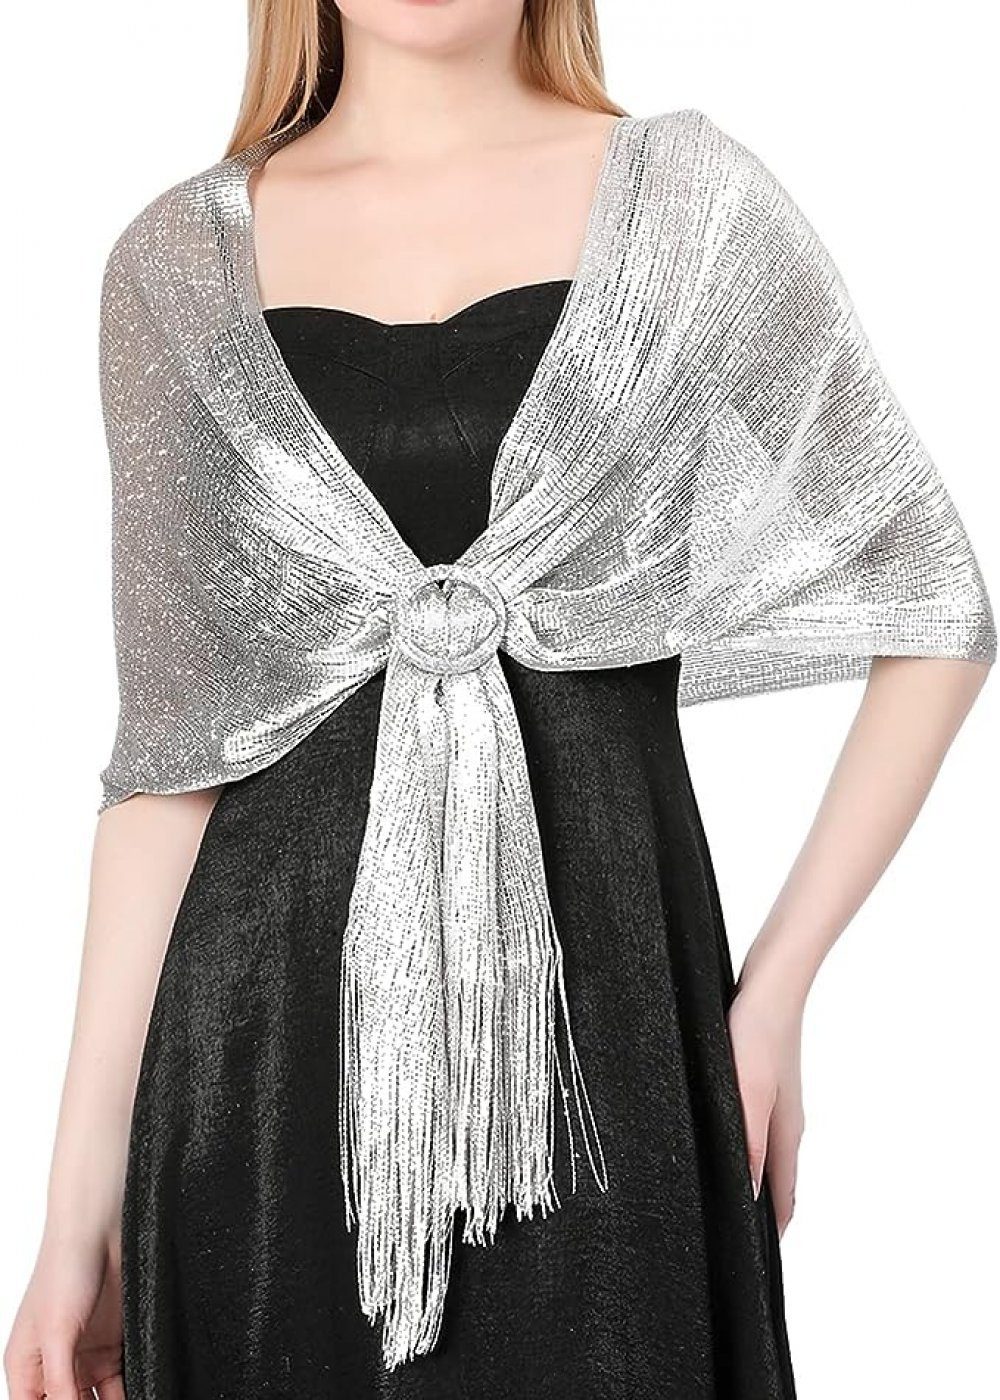 WaKuKa Schal Holiday metal buckle shawl suitable for sparkling evening parties silbrig